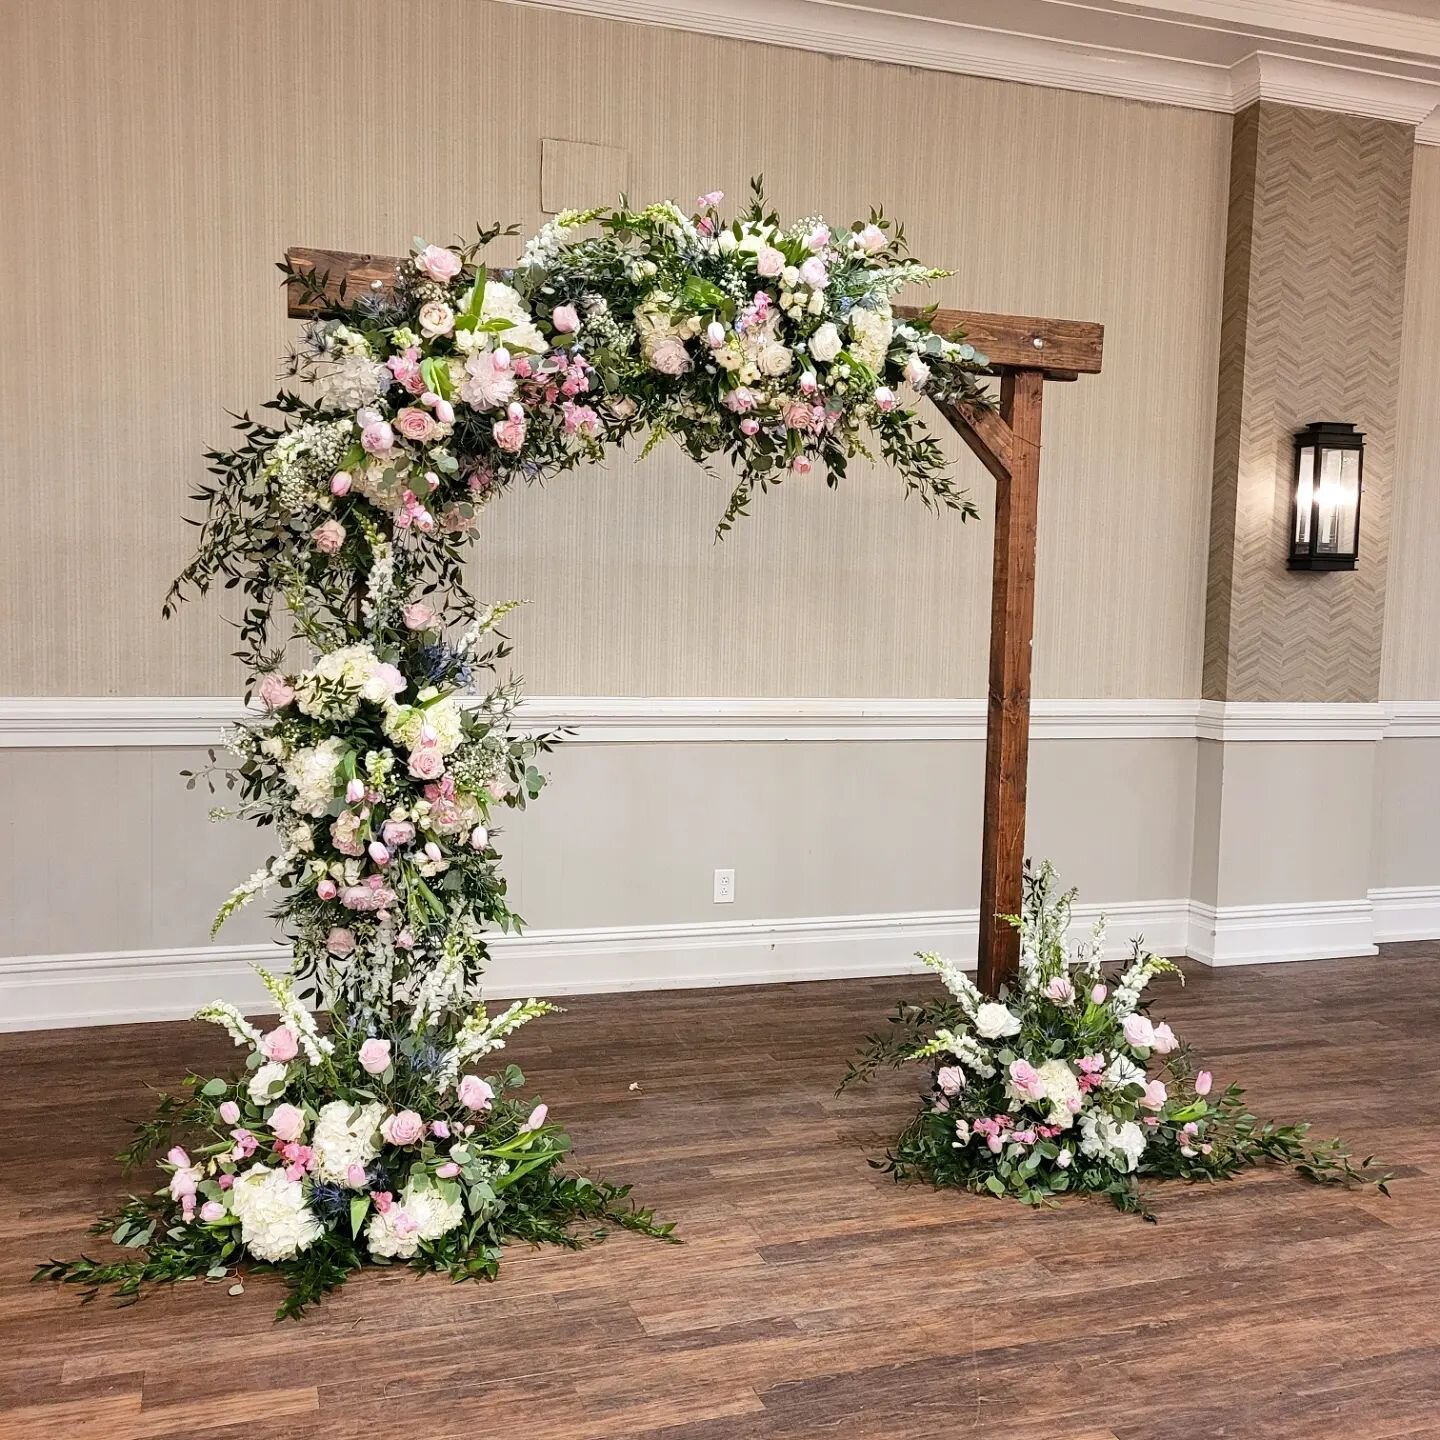 Chelsea's ceremony was so romantic and beautiful even if the weather wasn't our friend this weekend @groveatcenterton @savannahsgardenflorist #savannahsgardenflorist #savannahsgarden #ceremony #ceremonyarch #ceremonyflowers #weddingceremony #weddingf